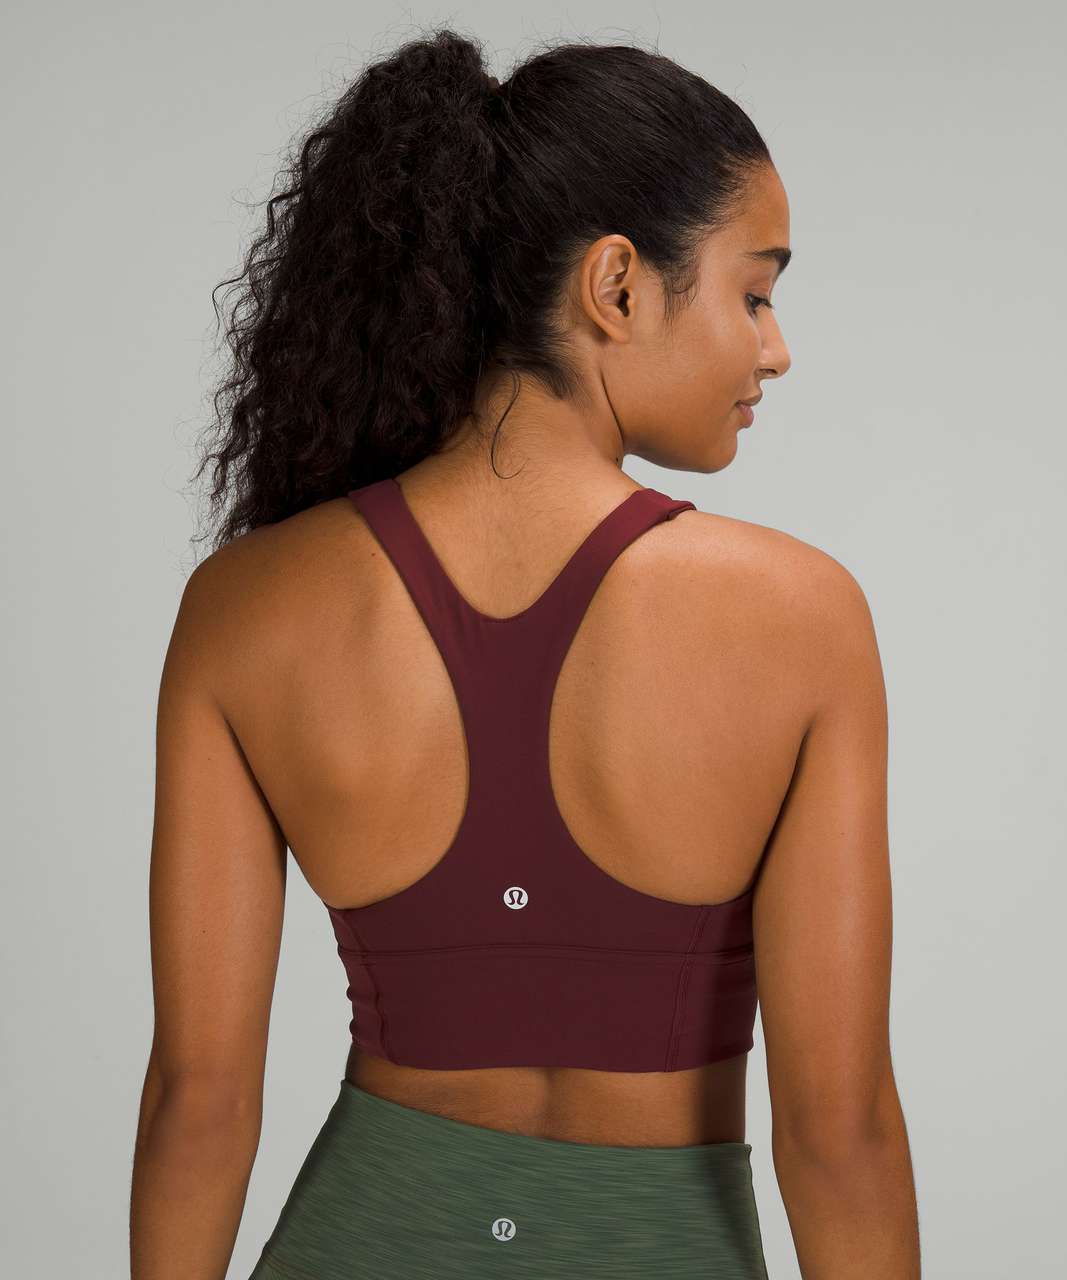 Late to the Roasted Brown train. Ribbed Nulu High Neck Yoga Bra (10) &  Wunder Train 25 in Ripened Raspberry (6). Had to size up 2 sizes in the bra  as it